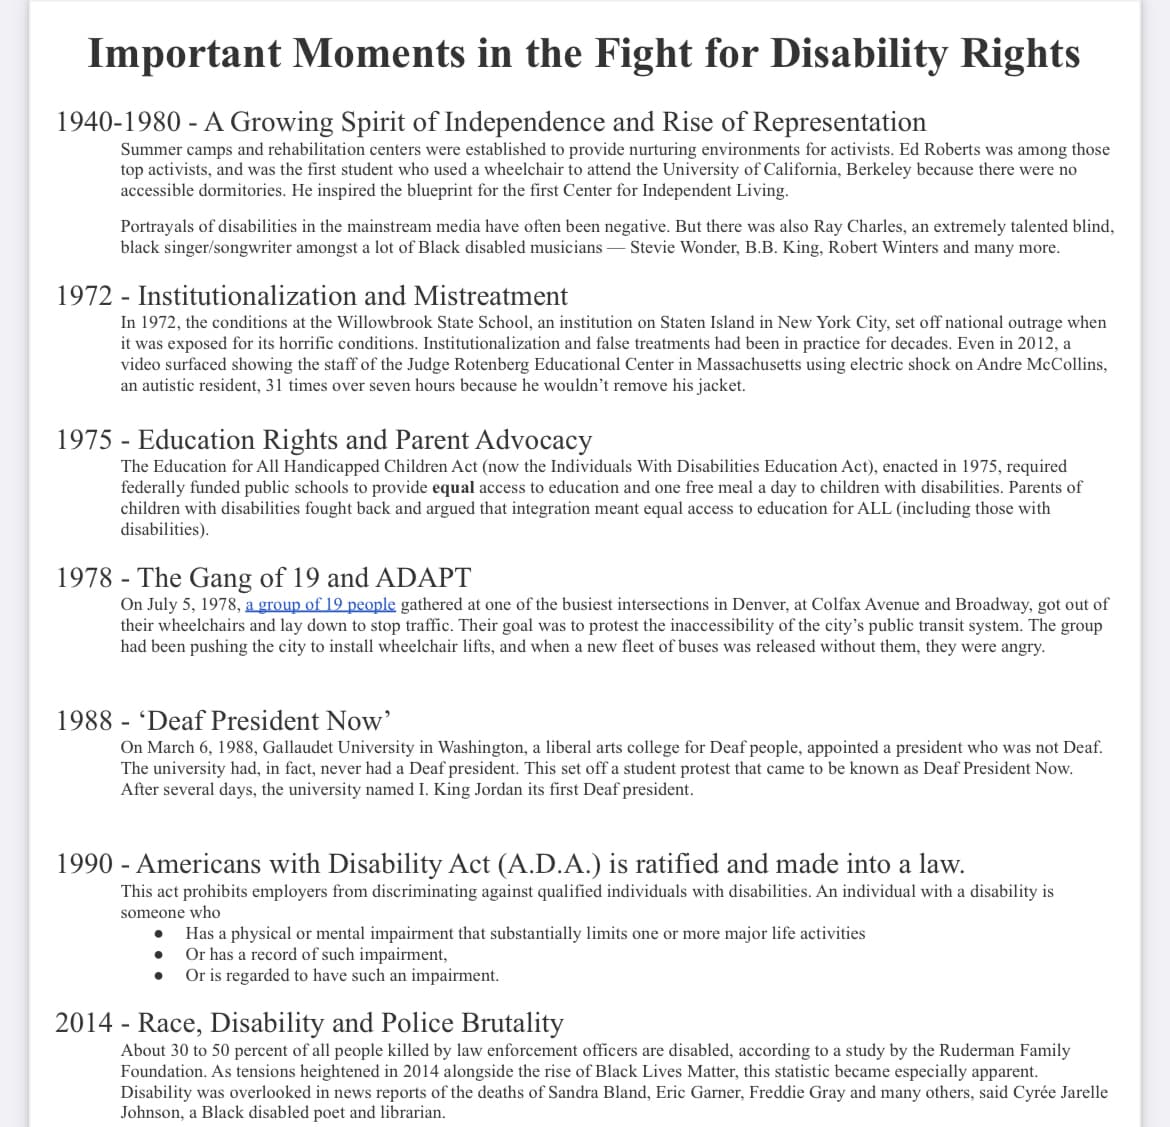 Important Moments in the Fight for Disability Rights
1940-1980 - A Growing Spirit of Independence and Rise of Representation
Summer camps and rehabilitation centers were established to provide nurturing environments for activists. Ed Roberts was among those
top activists, and was the first student who used a wheelchair to attend the University of California, Berkeley because there were no
accessible dormitories. He inspired the blueprint for the first Center for Independent Living.
Portrayals of disabilities in the mainstream media have often been negative. But there was also Ray Charles, an extremely talented blind,
black singer/songwriter amongst a lot of Black disabled musicians - Stevie Wonder, B.B. King, Robert Winters and many more.
1972 - Institutionalization and Mistreatment
In 1972, the conditions at the Willowbrook State School, an institution on Staten Island in New York City, set off national outrage when
it was exposed for its horrific conditions. Institutionalization and false treatments had been in practice for decades. Even in 2012, a
video surfaced showing the staff of the Judge Rotenberg Educational Center in Massachusetts using electric shock on Andre McCollins,
an autistic resident, 31 times over seven hours because he wouldn't remove his jacket.
1975 - Education Rights and Parent Advocacy
The Education for All Handicapped Children Act (now the Individuals With Disabilities Education Act), enacted in 1975, required
federally funded public schools to provide equal access to education and one free meal a day to children with disabilities. Parents of
children with disabilities fought back and argued that integration meant equal access to education for ALL (including those with
disabilities).
1978- The Gang of 19 and ADAPT
On July 5, 1978, a group of 19 people gathered at one of the busiest intersections in Denver, at Colfax Avenue and Broadway, got out of
their wheelchairs and lay down to stop traffic. Their goal was to protest the inaccessibility of the city's public transit system. The group
had been pushing the city to install wheelchair lifts, and when a new fleet of buses was released without them, they were angry.
1988 'Deaf President Now'
On March 6, 1988, Gallaudet University in Washington, a liberal arts college for Deaf people, appointed a president who was not Deaf.
The university had, in fact, never had a Deaf president. This set off a student protest that came to be known as Deaf President Now.
After several days, the university named I. King Jordan its first Deaf president.
1990 - Americans with Disability Act (A.D.A.) is ratified and made into a law.
This act prohibits employers from discriminating against qualified individuals with disabilities. An individual with a disability is
someone who
Has a physical or mental impairment that substantially limits one or more major life activities
Or has a record of such impairment,
Or is regarded to have such an impairment.
●
●
2014 - Race, Disability and Police Brutality
About 30 to 50 percent of all people killed by law enforcement officers are disabled, according to a study by the Ruderman Family
Foundation. As tensions heightened in 2014 alongside the rise of Black Lives Matter, this statistic became especially apparent.
Disability was overlooked in news reports of the deaths of Sandra Bland, Eric Garner, Freddie Gray and many others, said Cyrée Jarelle
Johnson, a Black disabled poet and librarian.